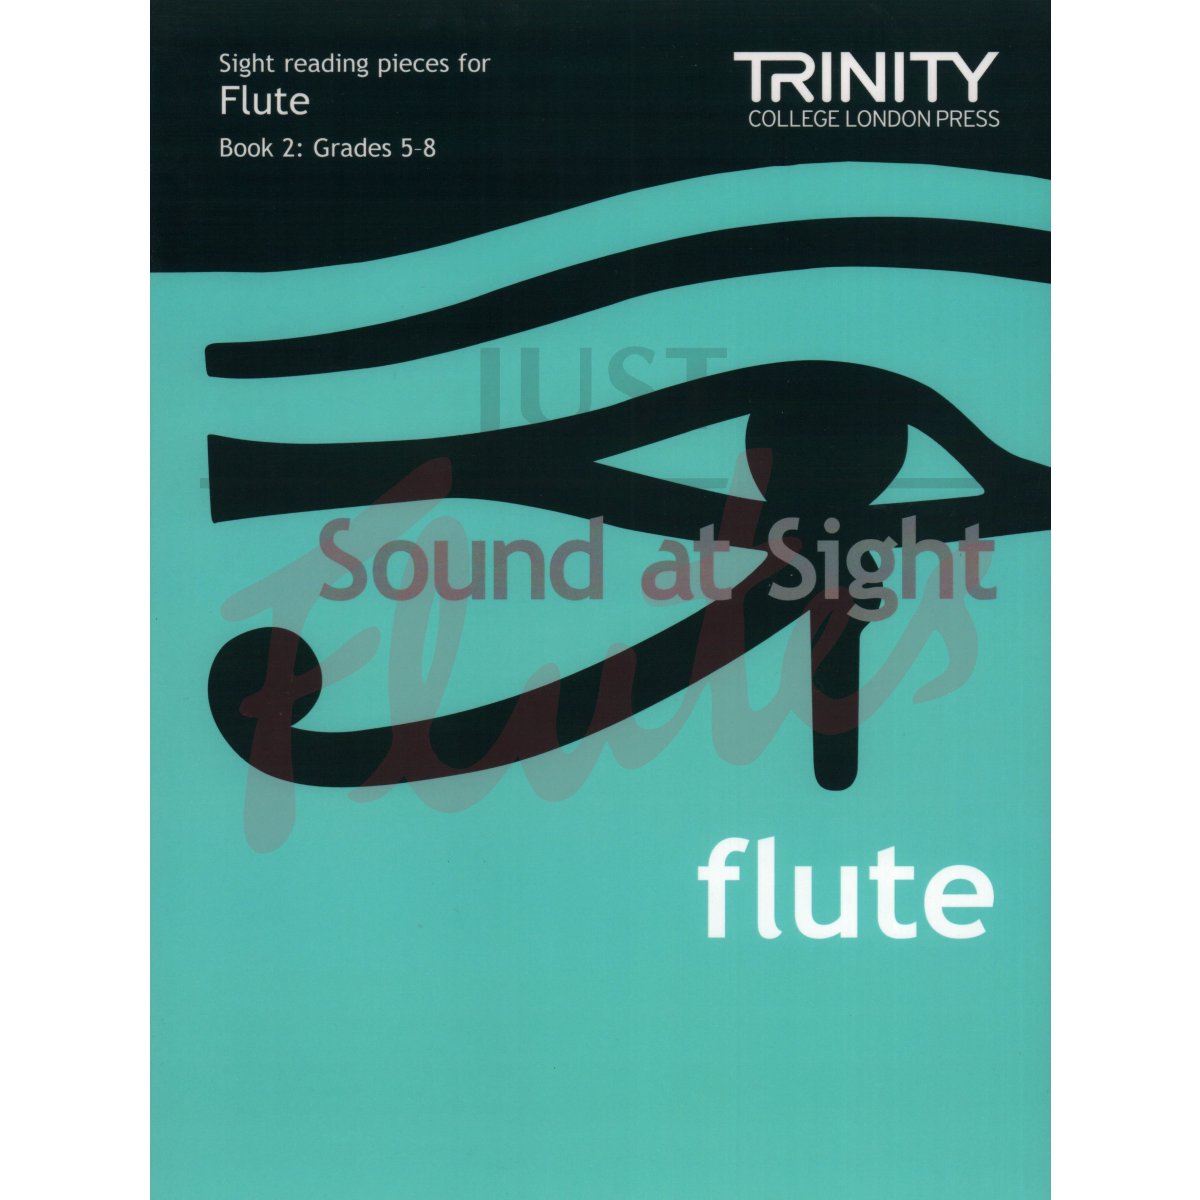 Sound at Sight Flute Book 2